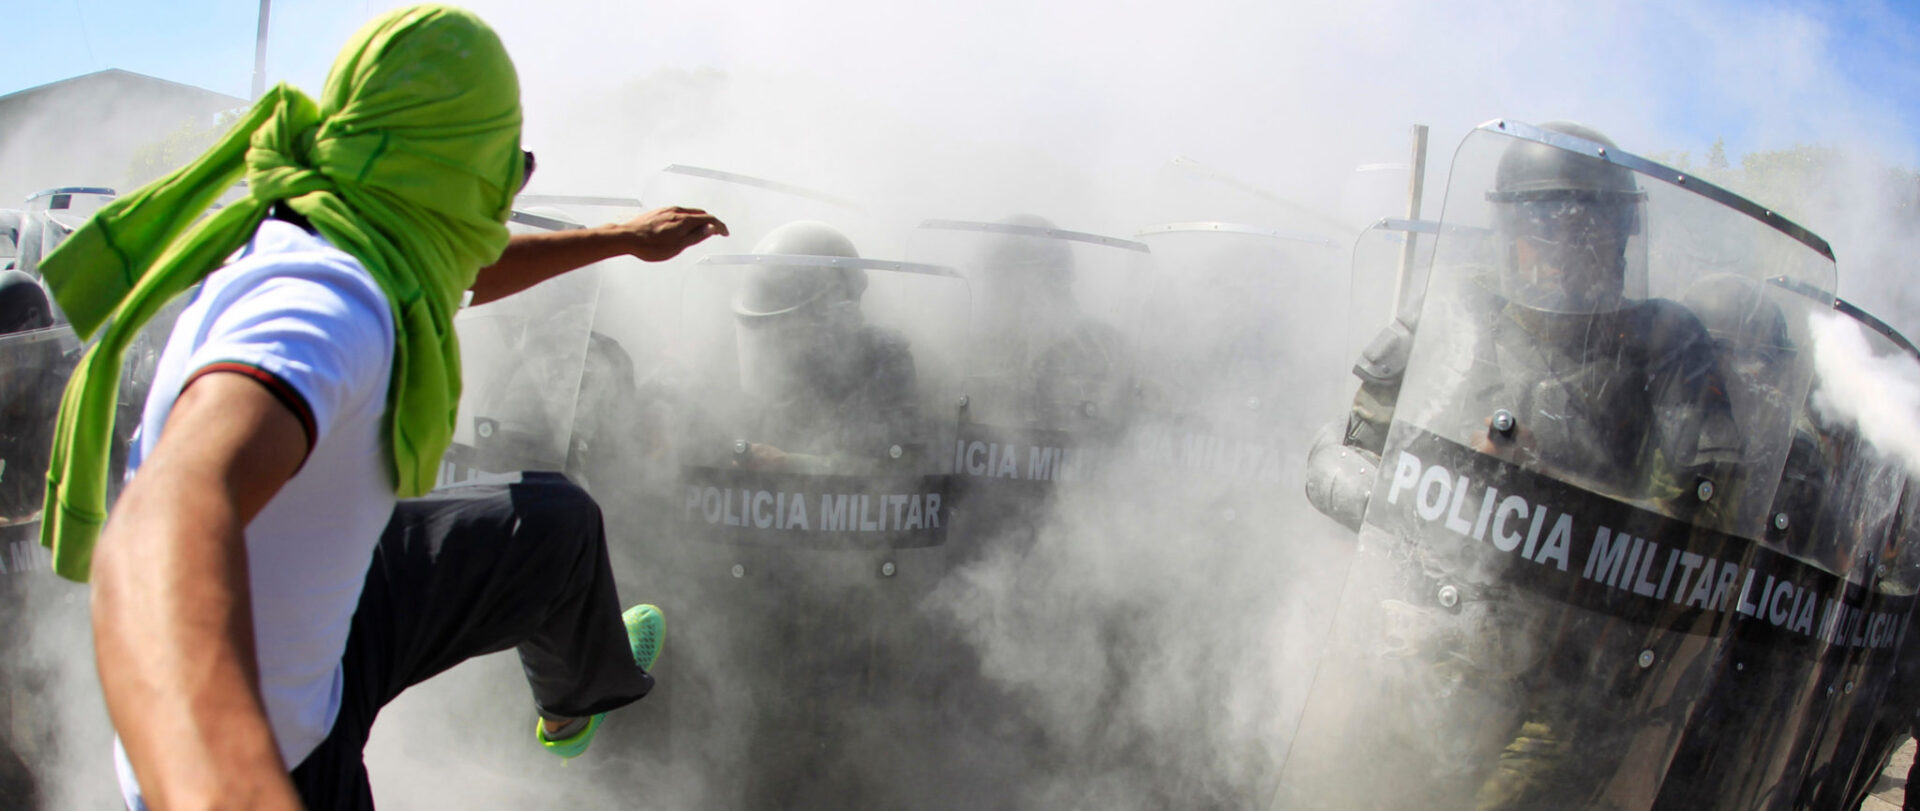 225395_activist_kicks_the_shields_of_the_military_police_officers_during_a_demonstration_in_the_military_zone_of_the_27th_infantry_battalion_in_iguala_guerrero.jpg